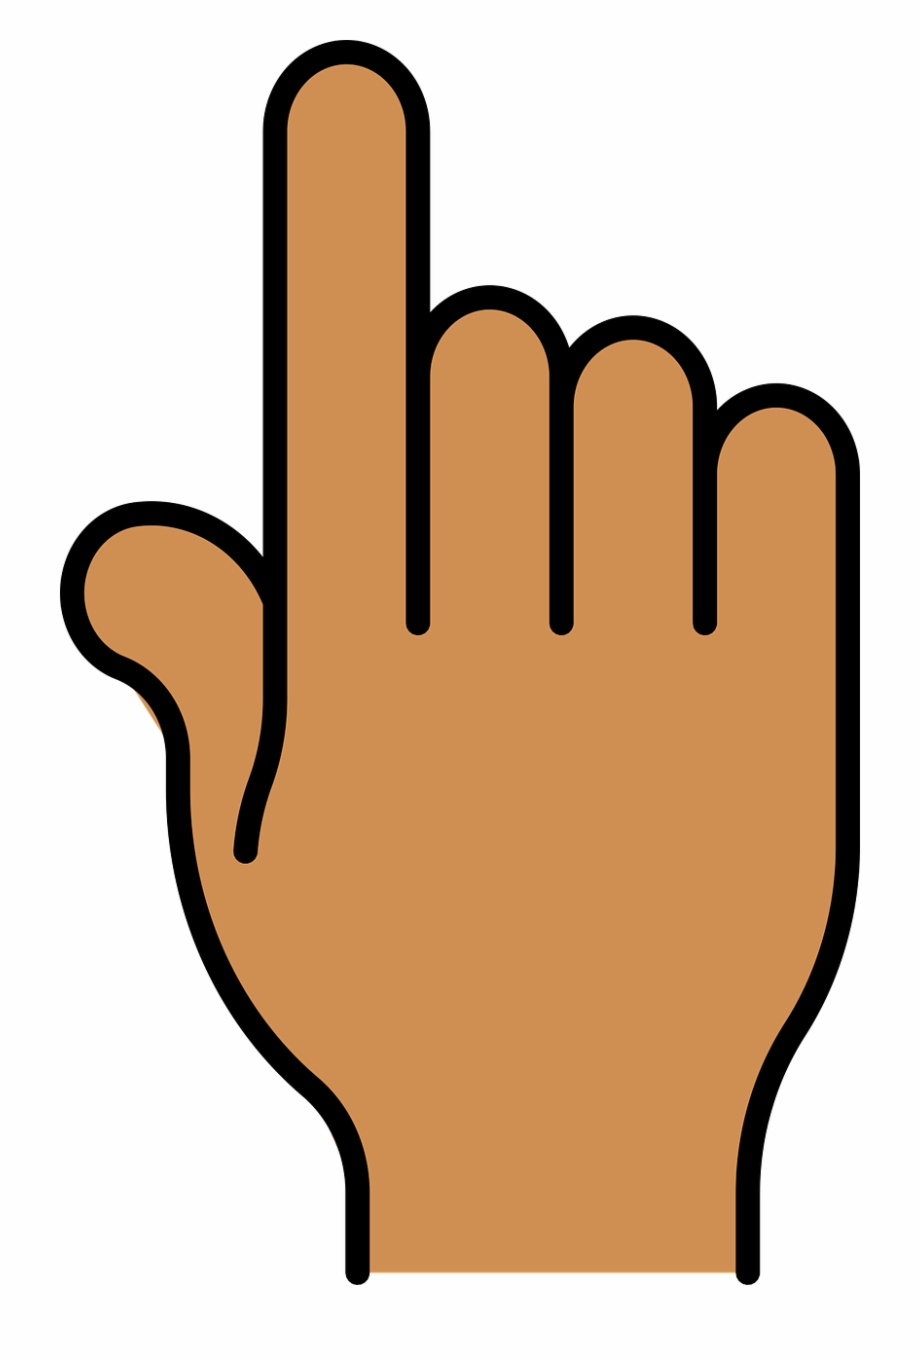 Free Finger Point Png, Download Free Clip Art, Free Clip Art.